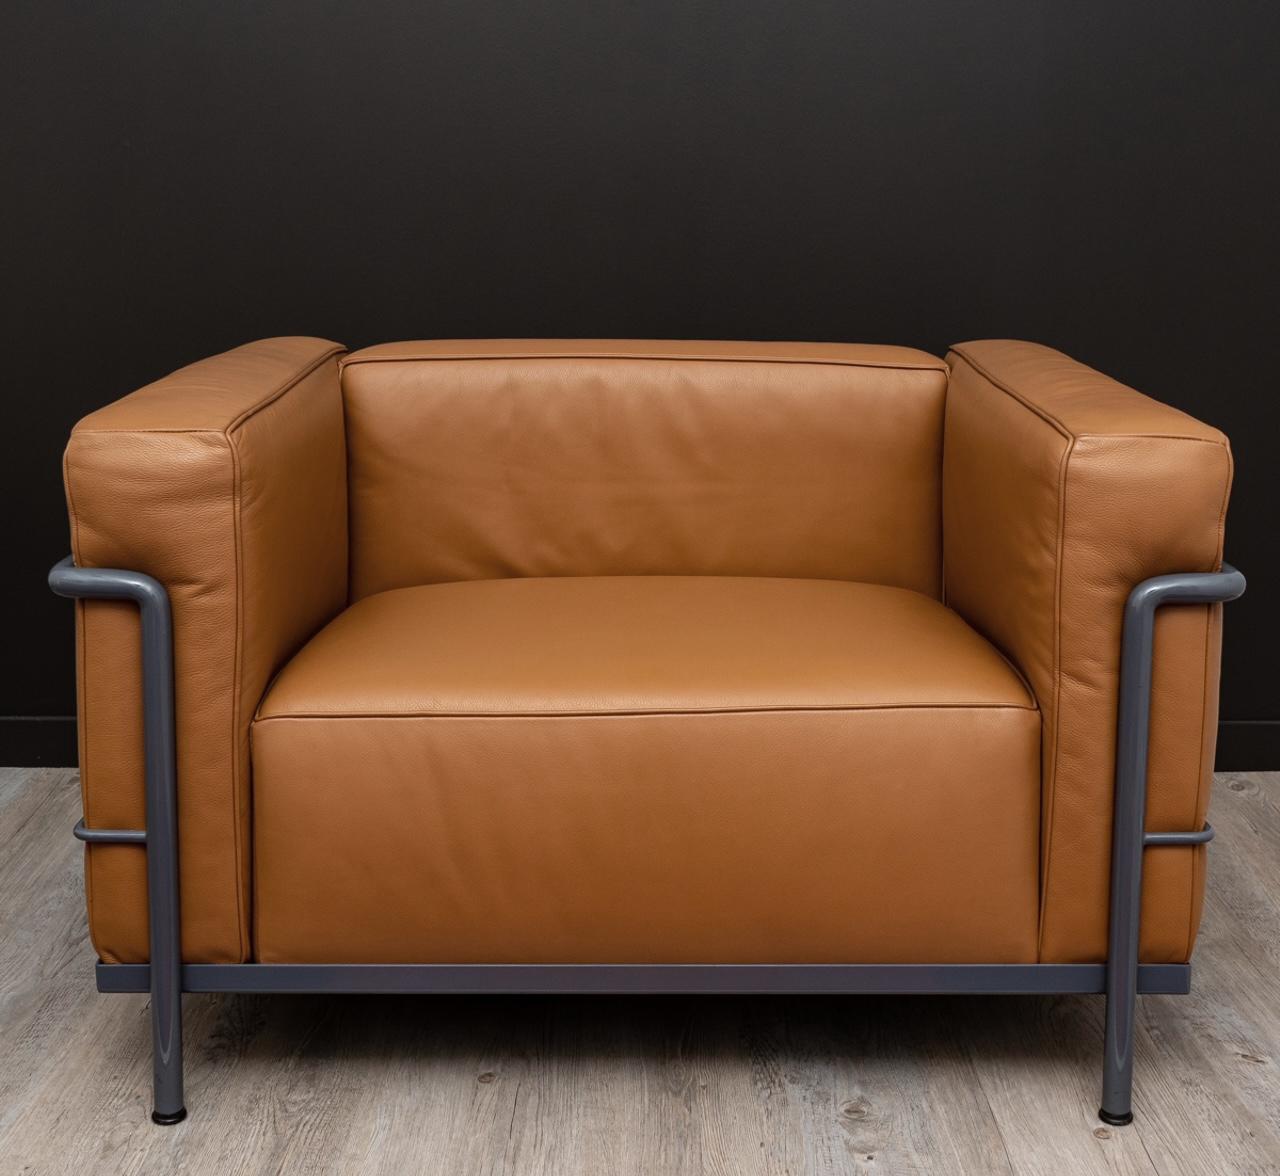 LC3 armchair designed by Le Corbusier, Perriand, Jeanneret in 1928.

Edition in cognac brown leather by Cassina, circa 2000.

Lacquered structure in slate gray.

Cassina serial number and ‘’Le Corbusier’’ engraved signature.

Very good